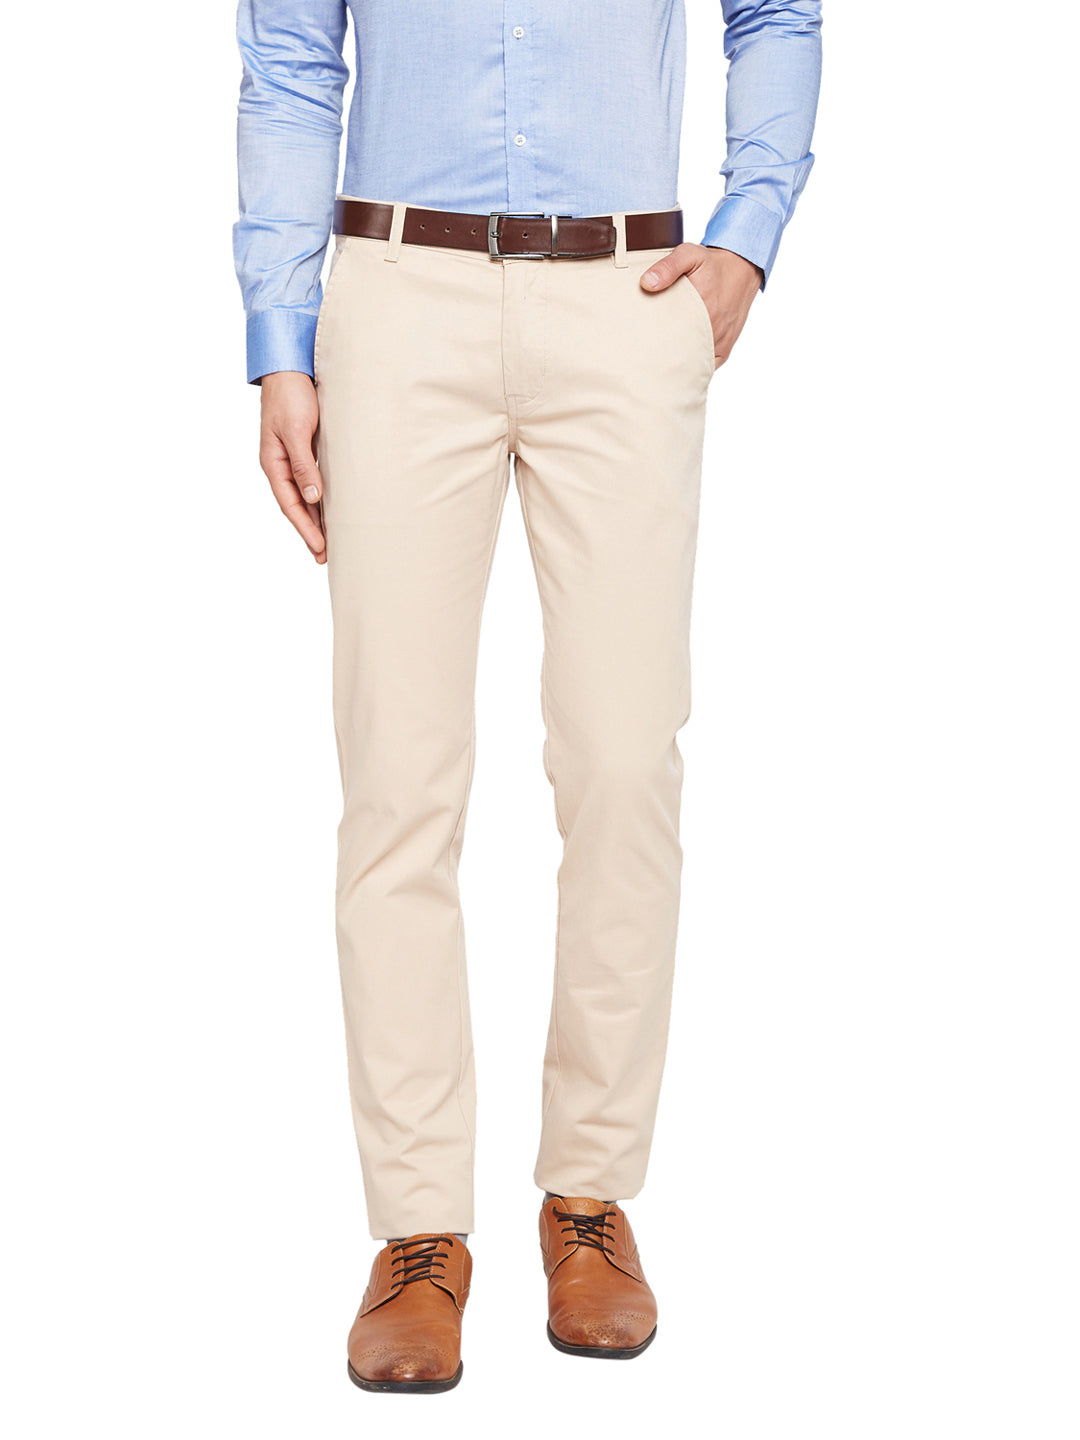 Men Beige Self Design Solid Stretchable Mid Rise Slim Fit Chinos Trouser